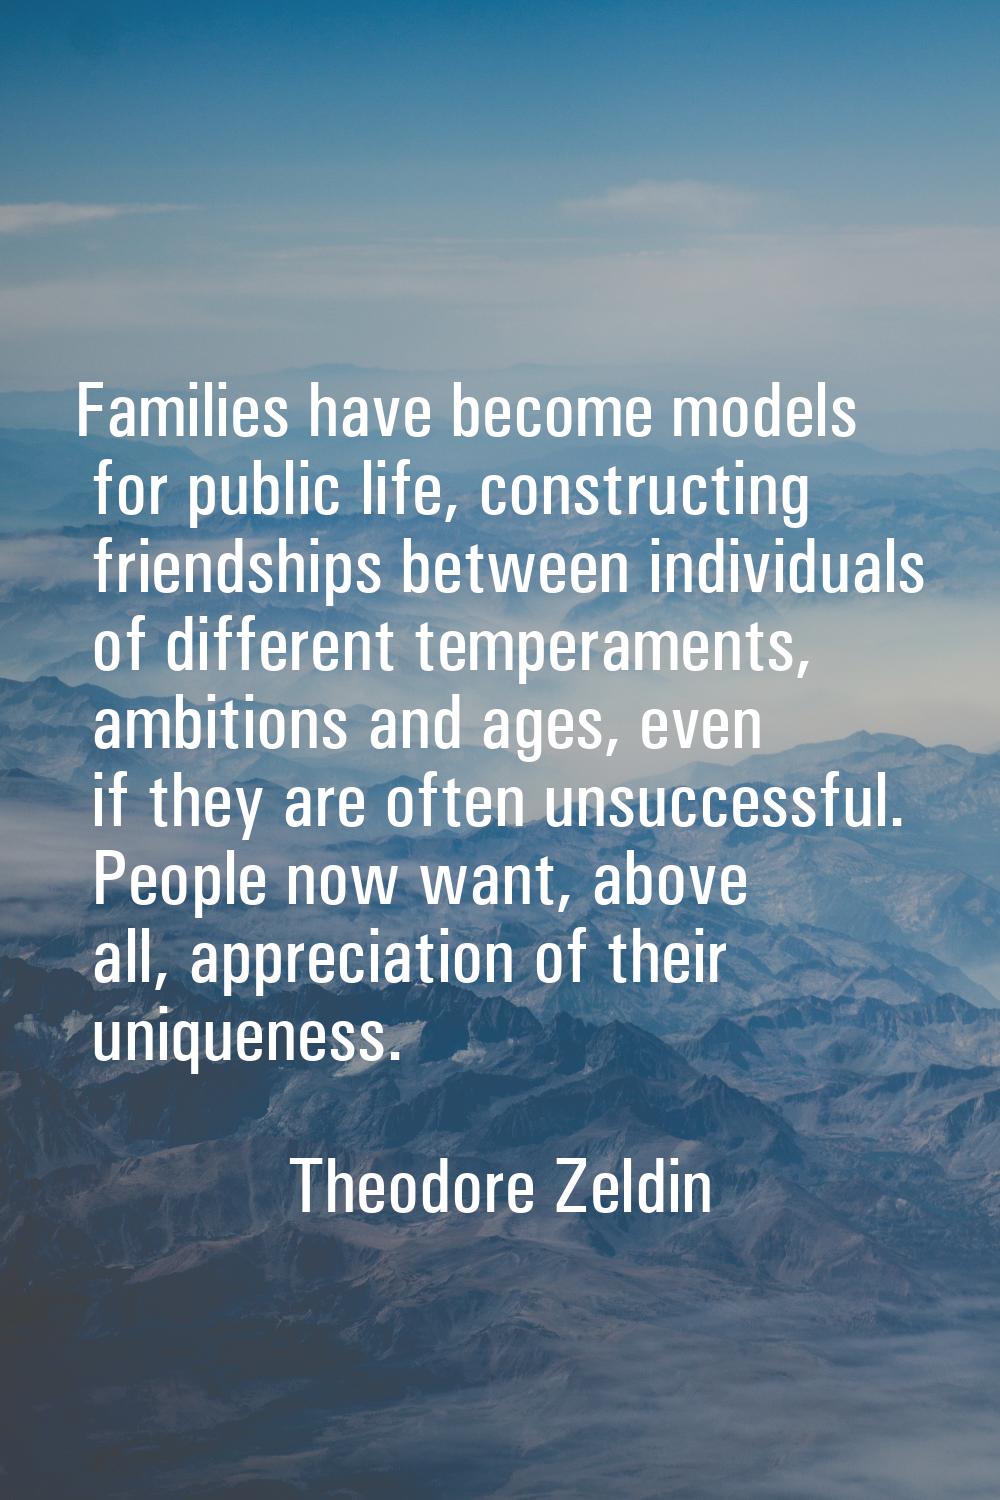 Families have become models for public life, constructing friendships between individuals of differ